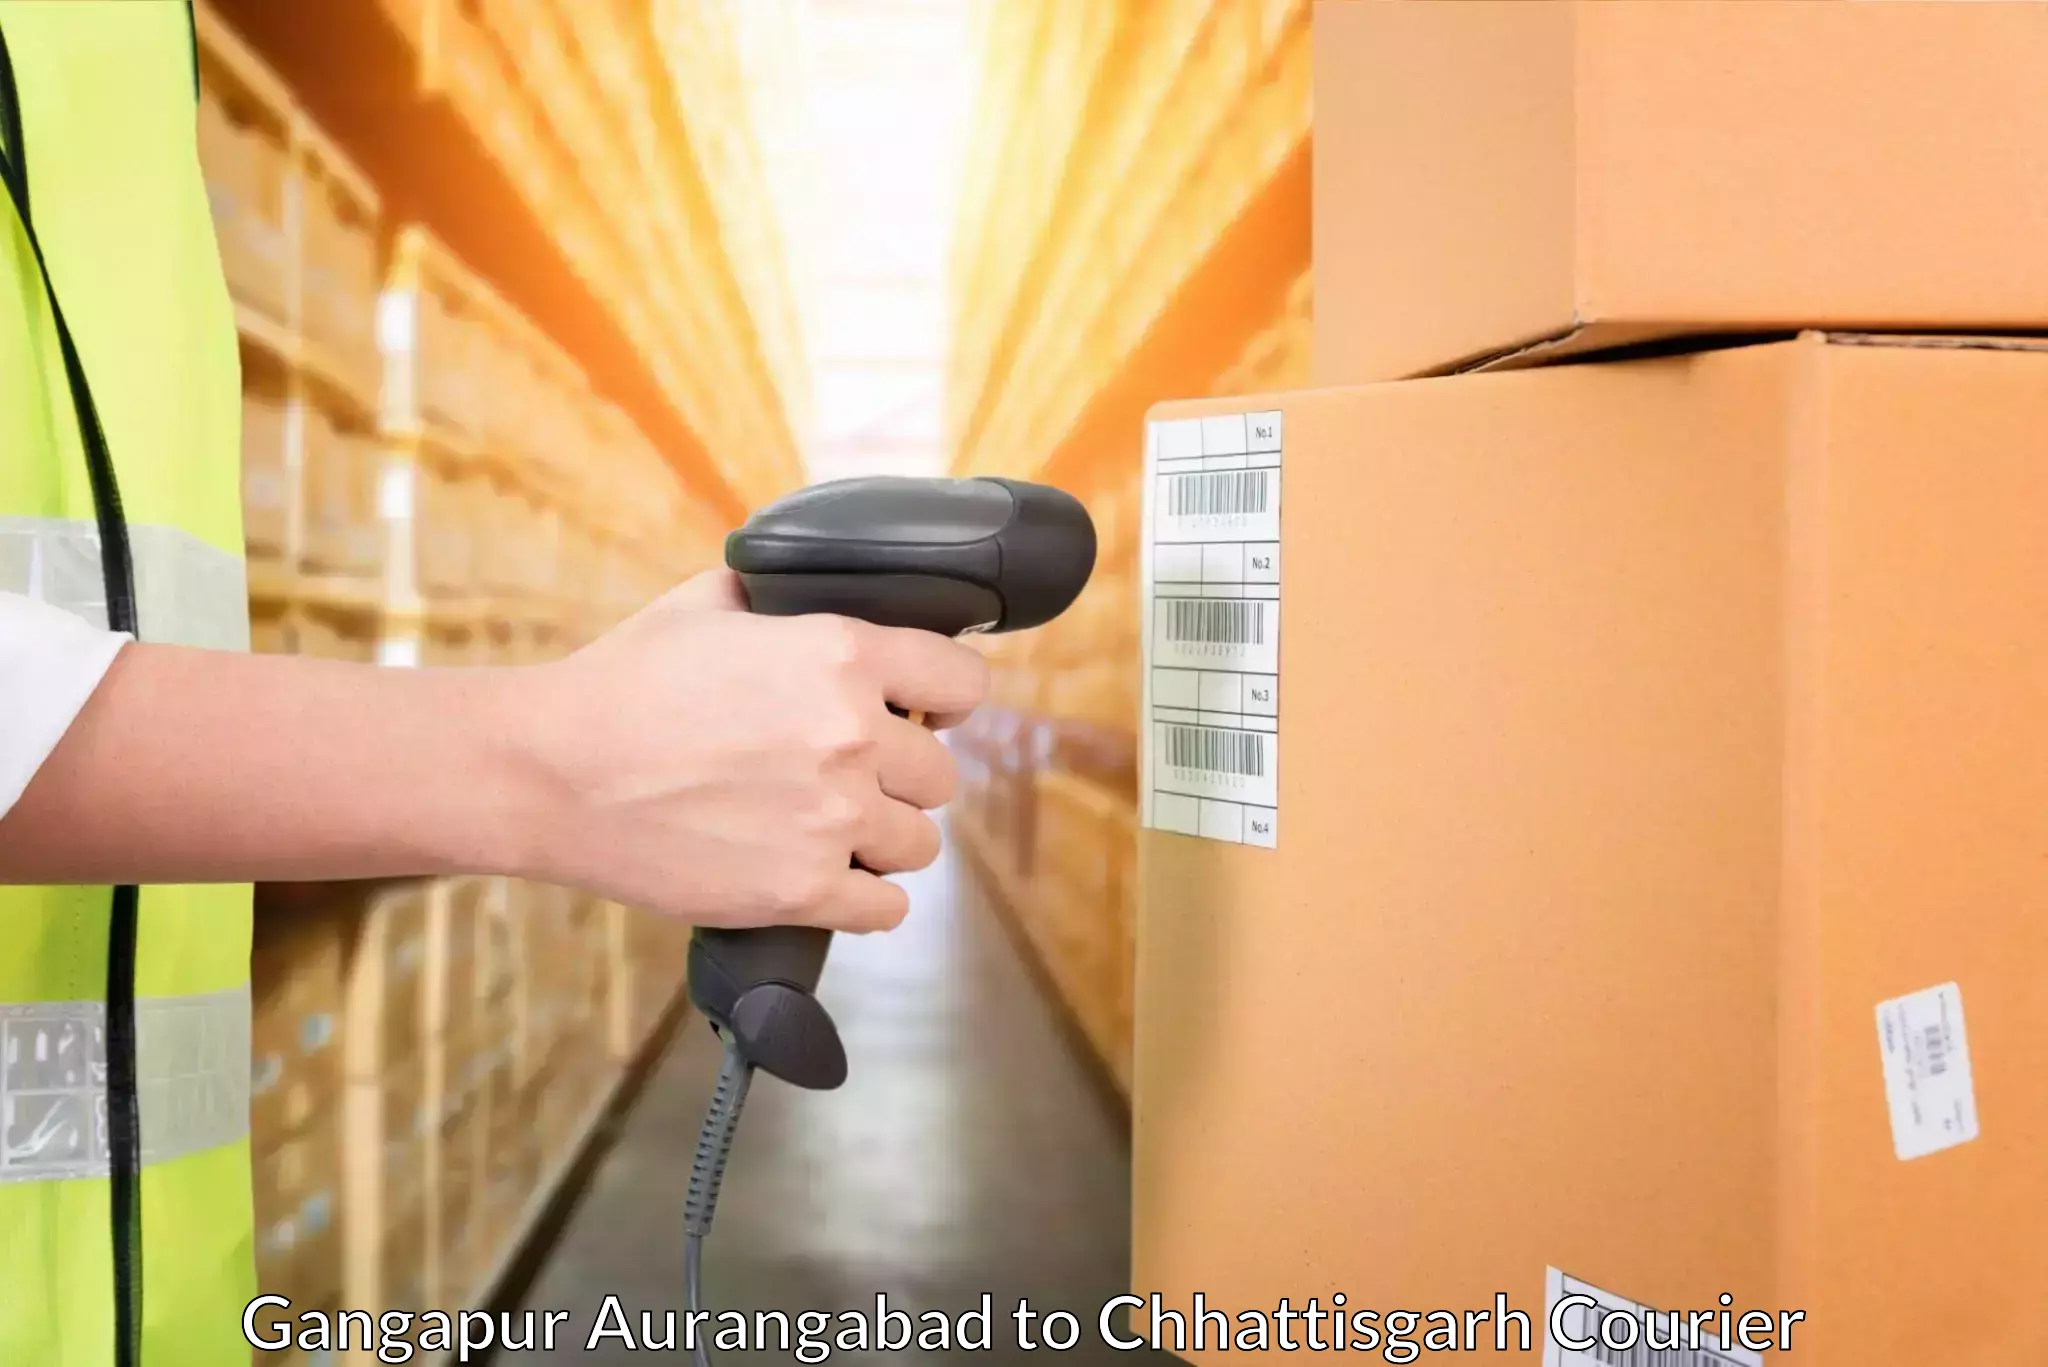 Expedited parcel delivery in Gangapur Aurangabad to Kharsia